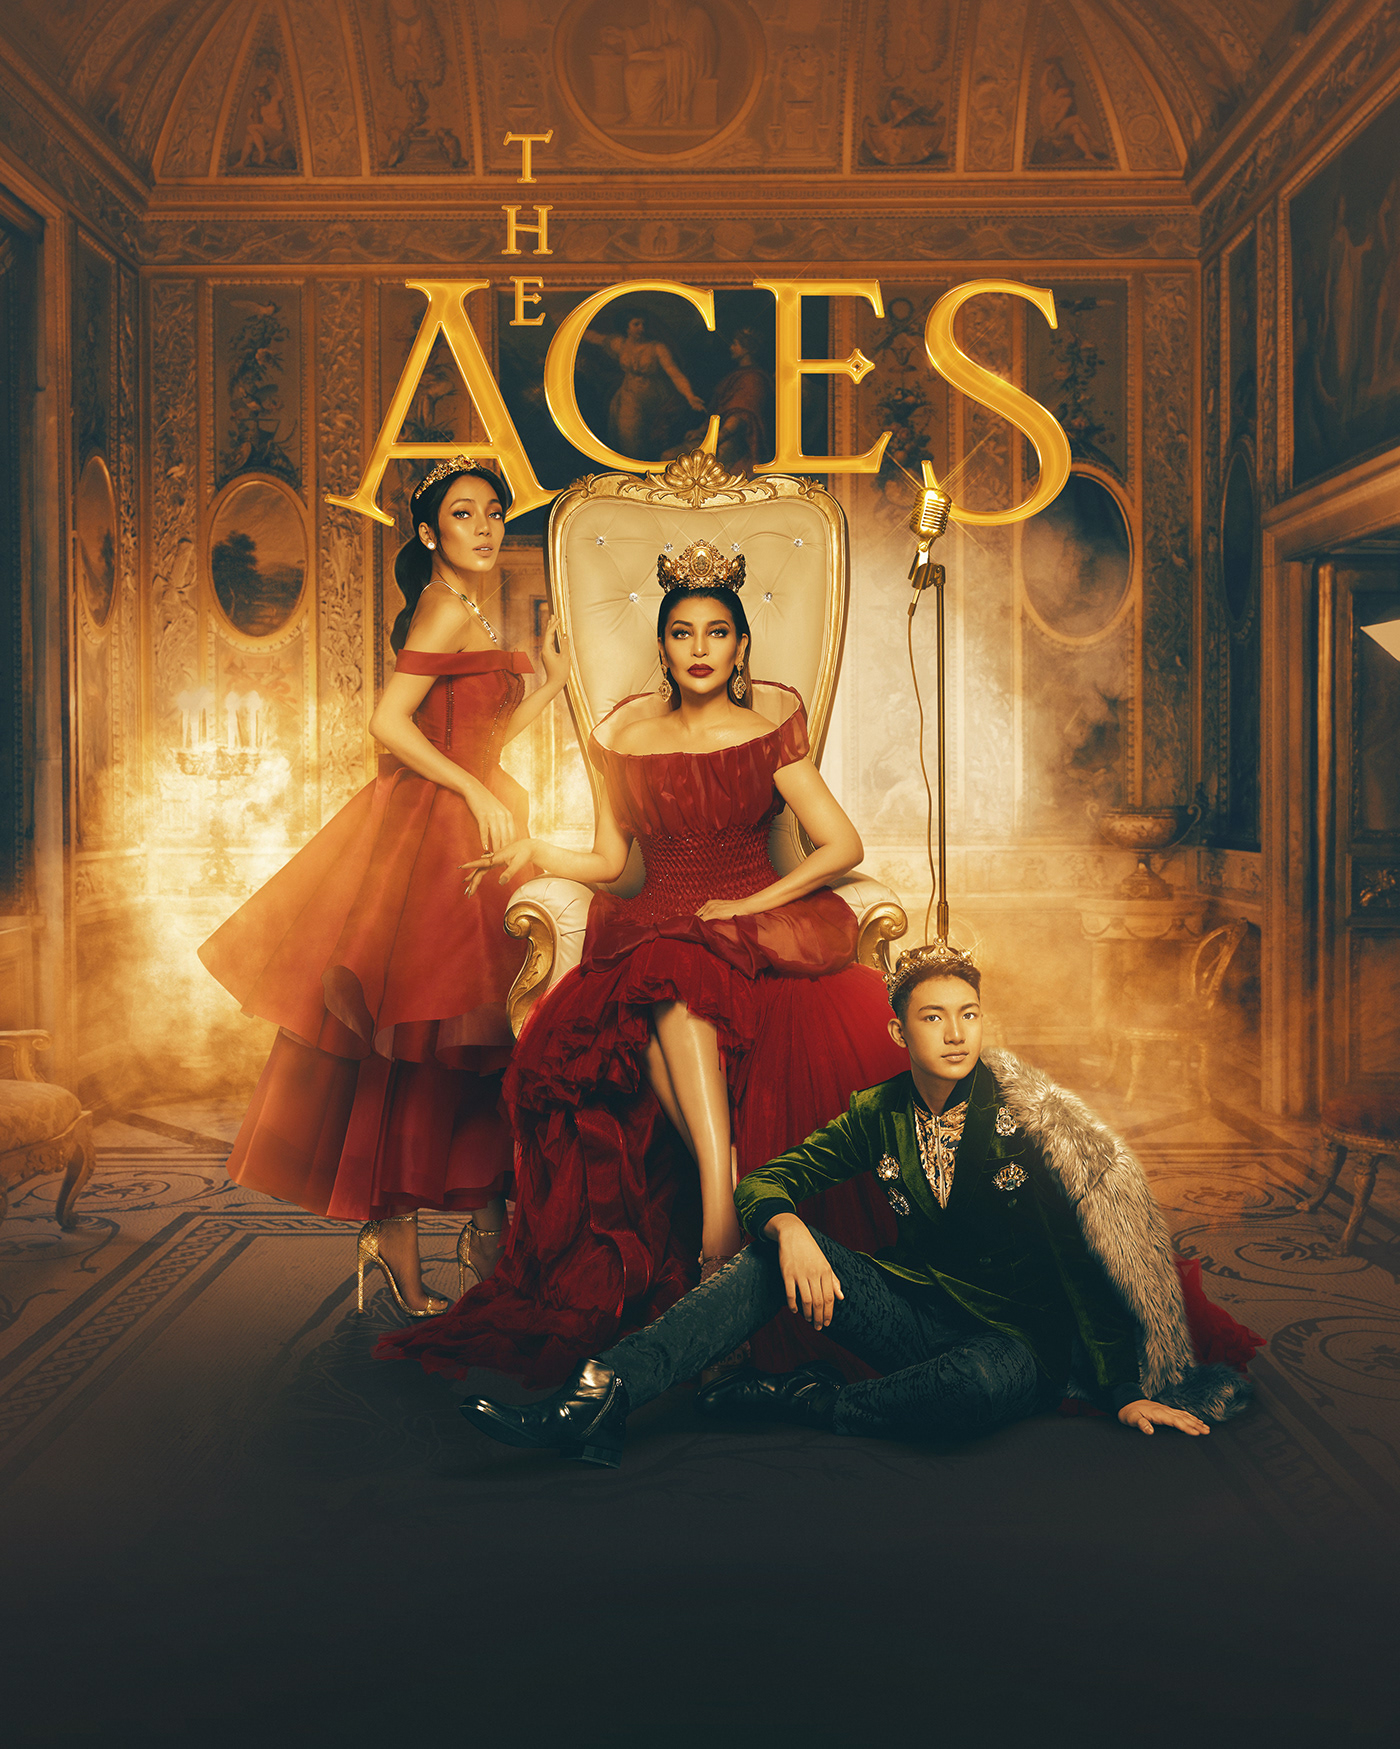 The Aces poster concert posters royalty Royals Game of Thrones throne monarch medieval Photo Manipulation 